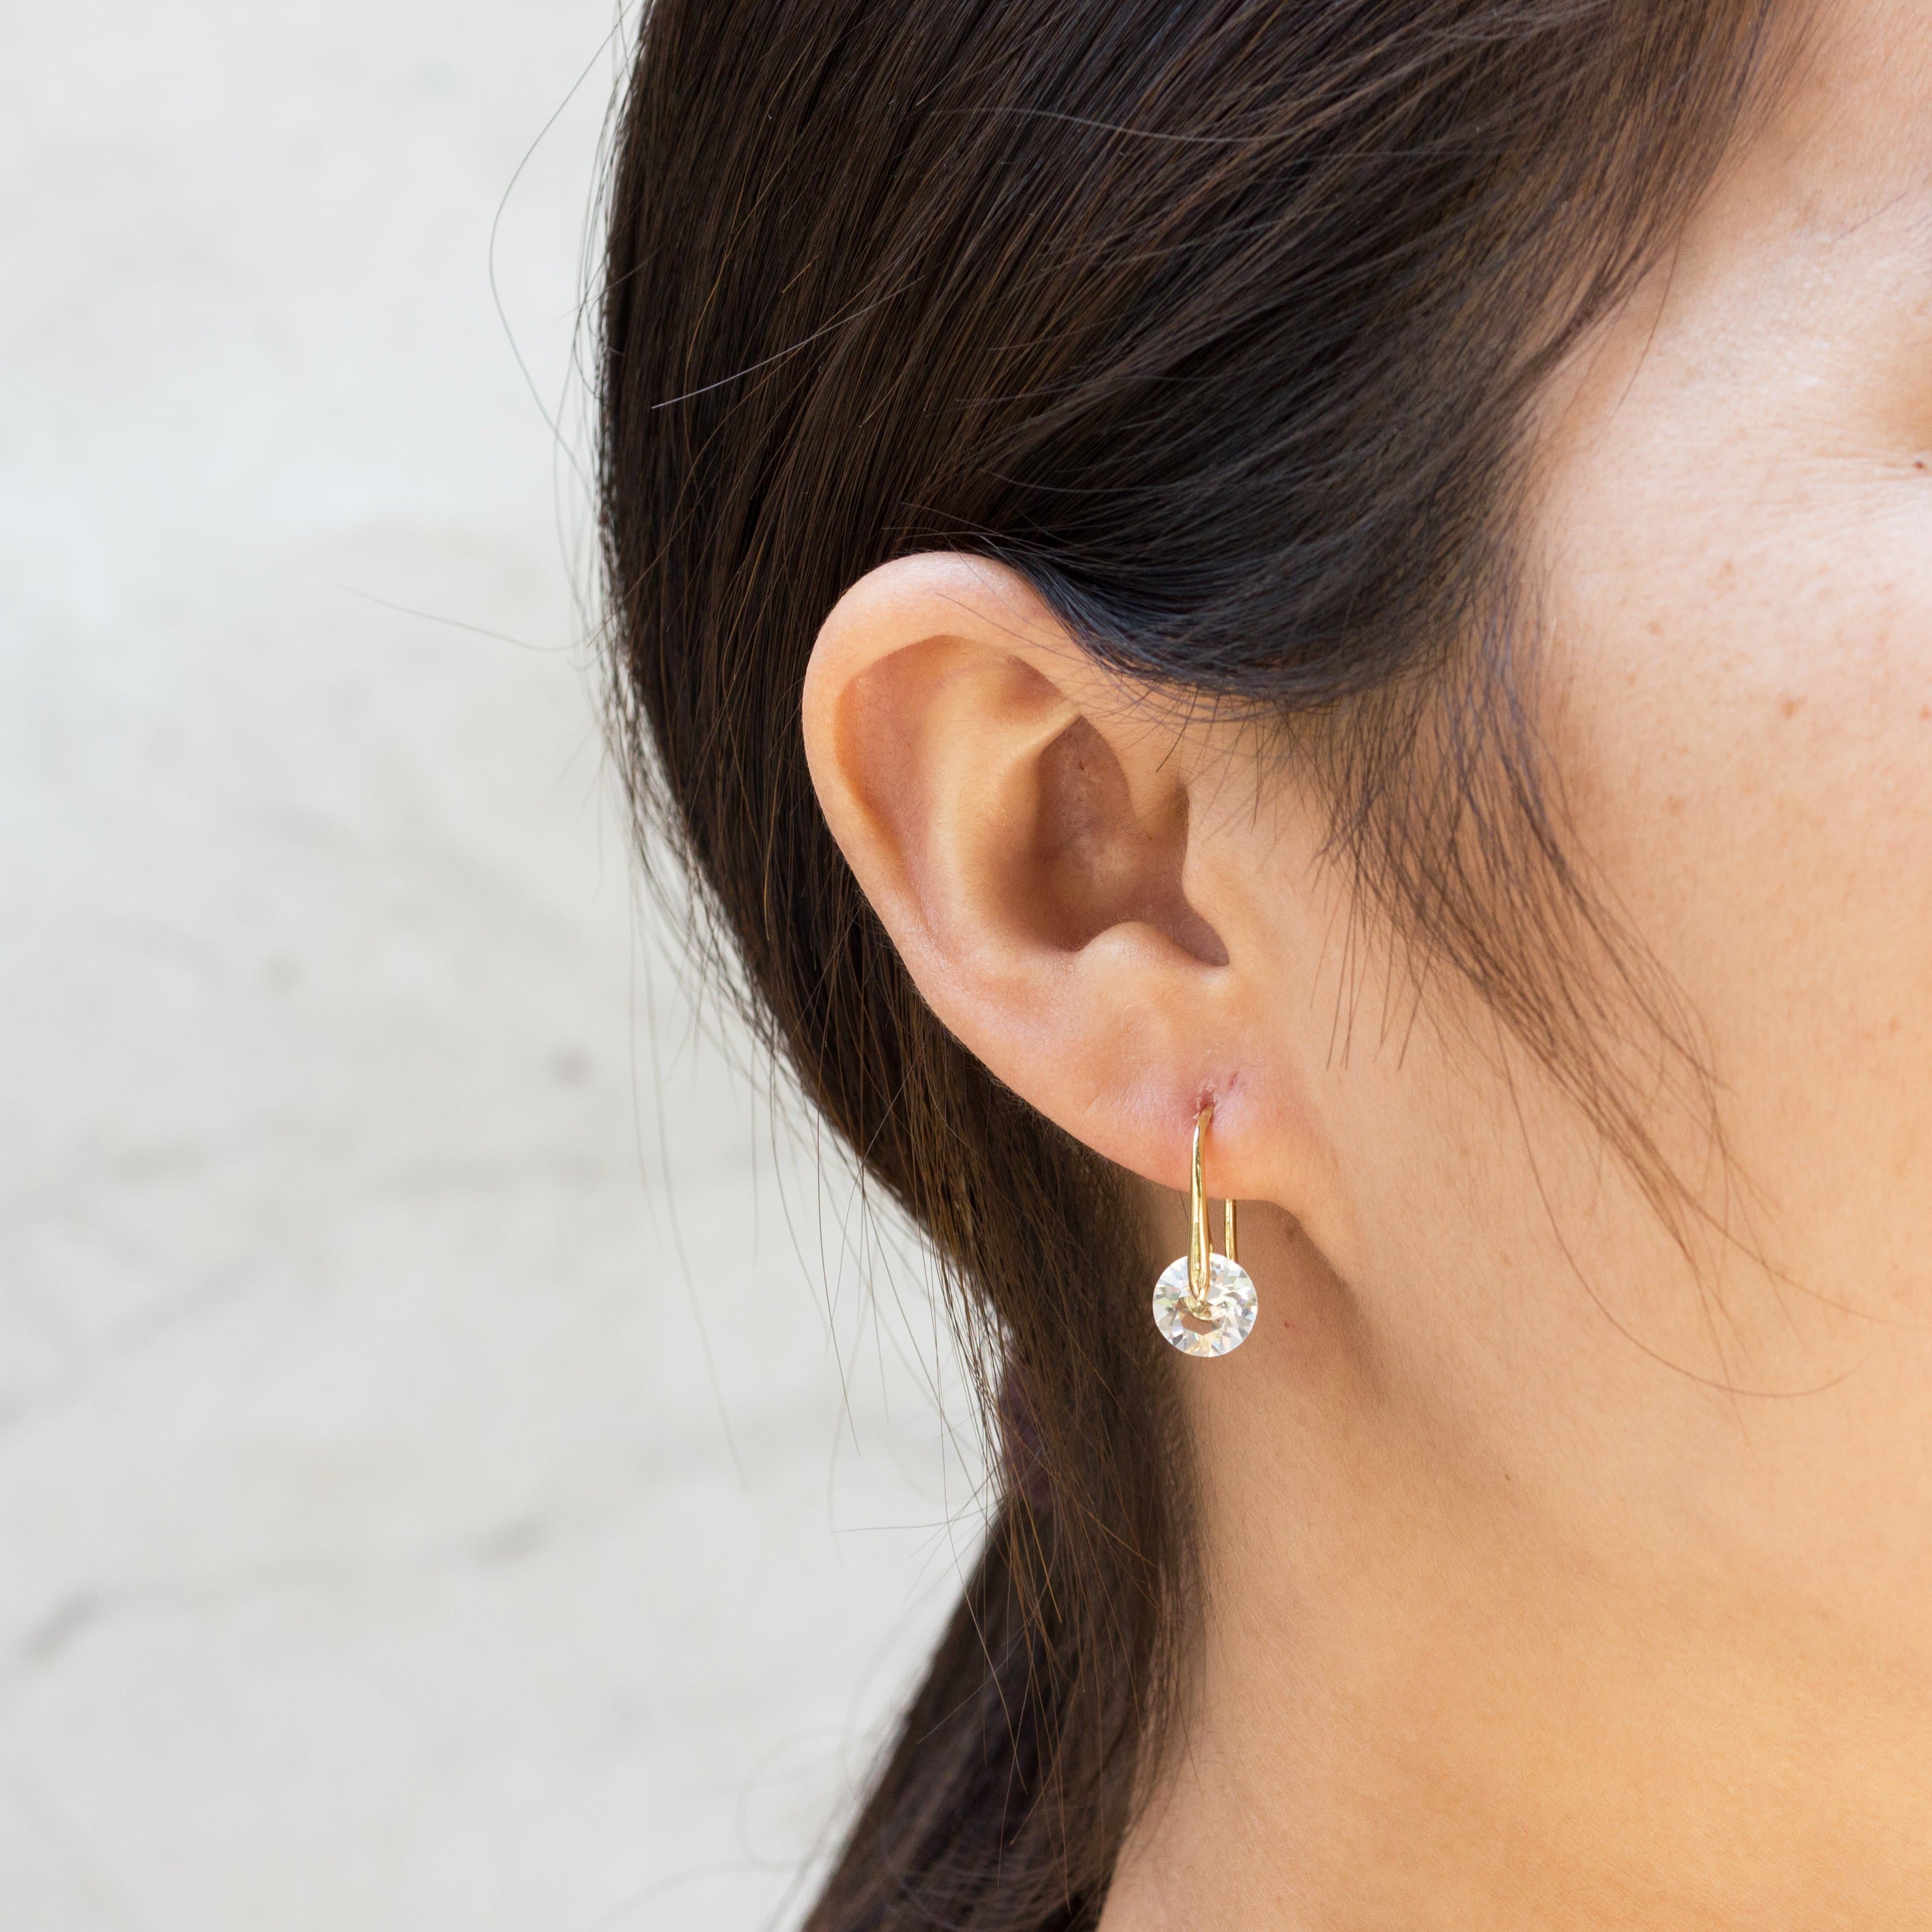 Gold Plated Atlas Earrings Created with Zircondia® Crystals